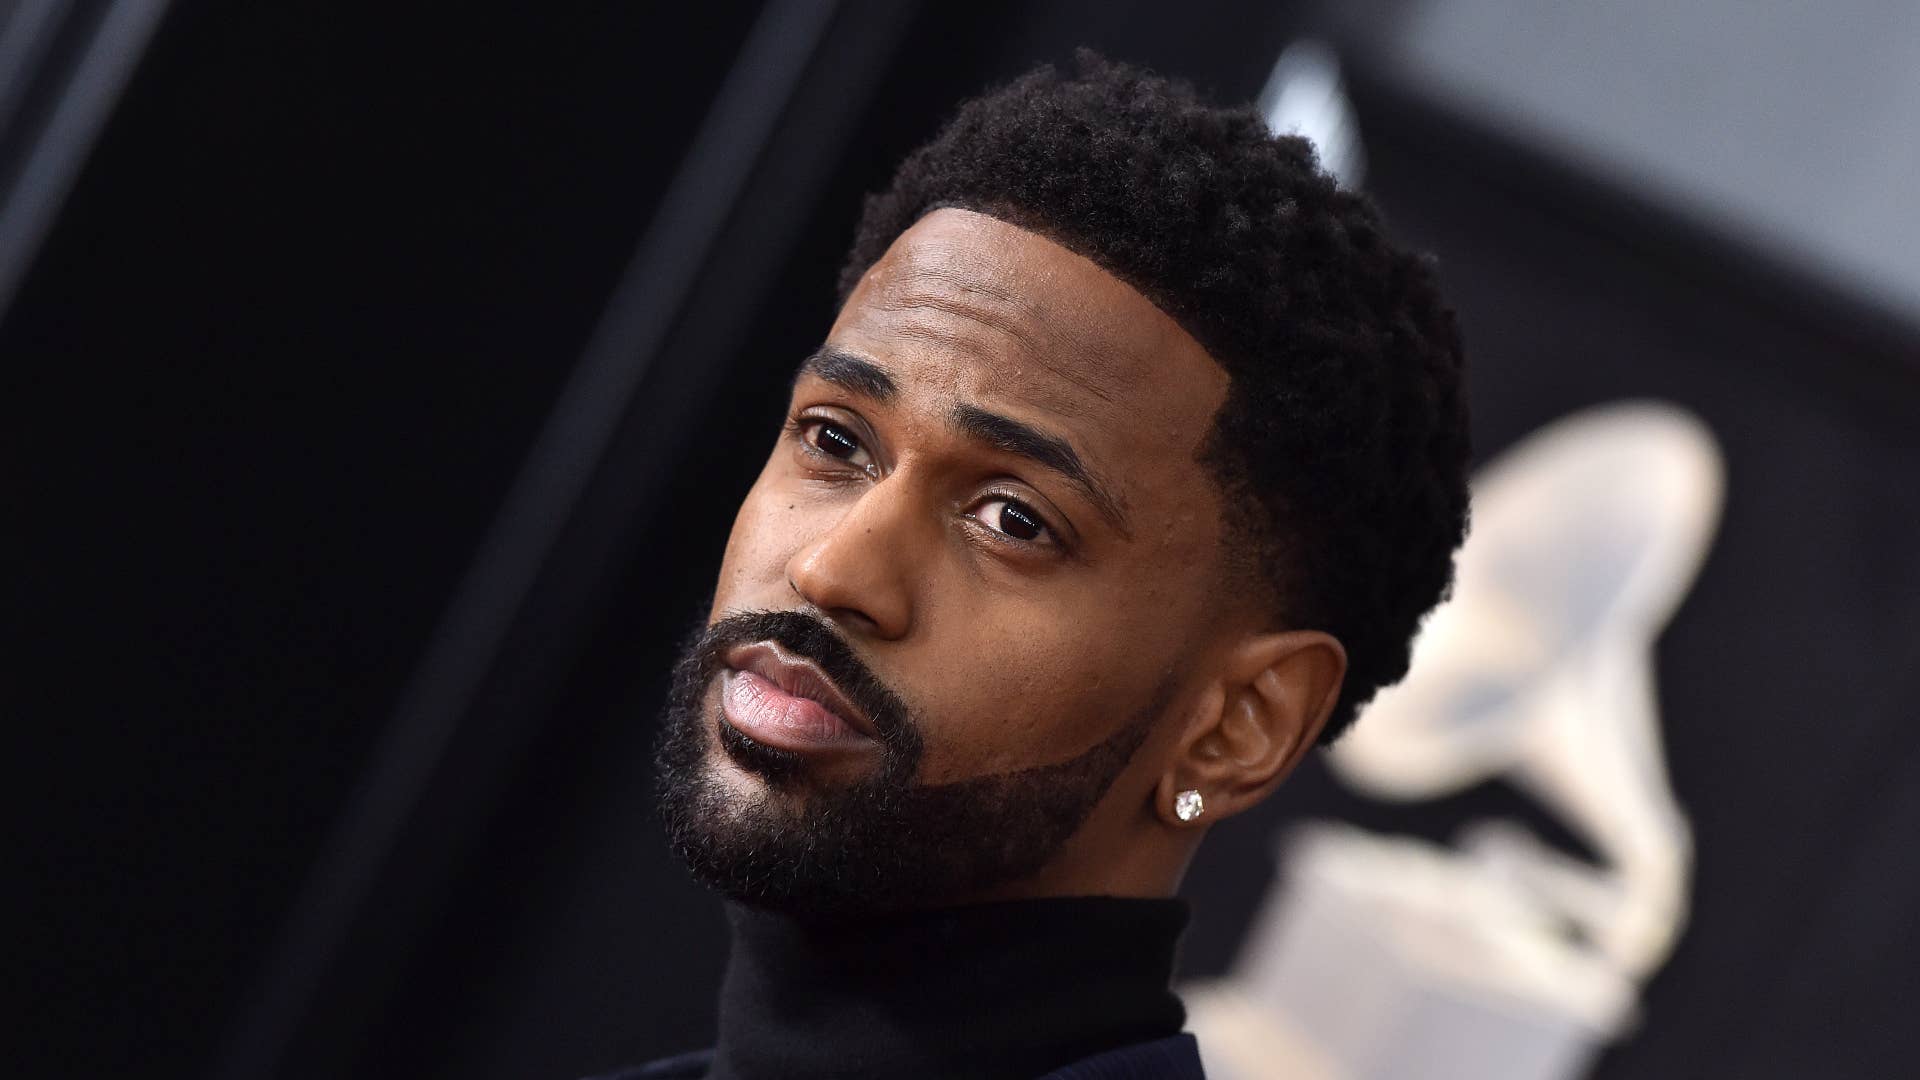 Big Sean attends the 60th Annual GRAMMY Awards.